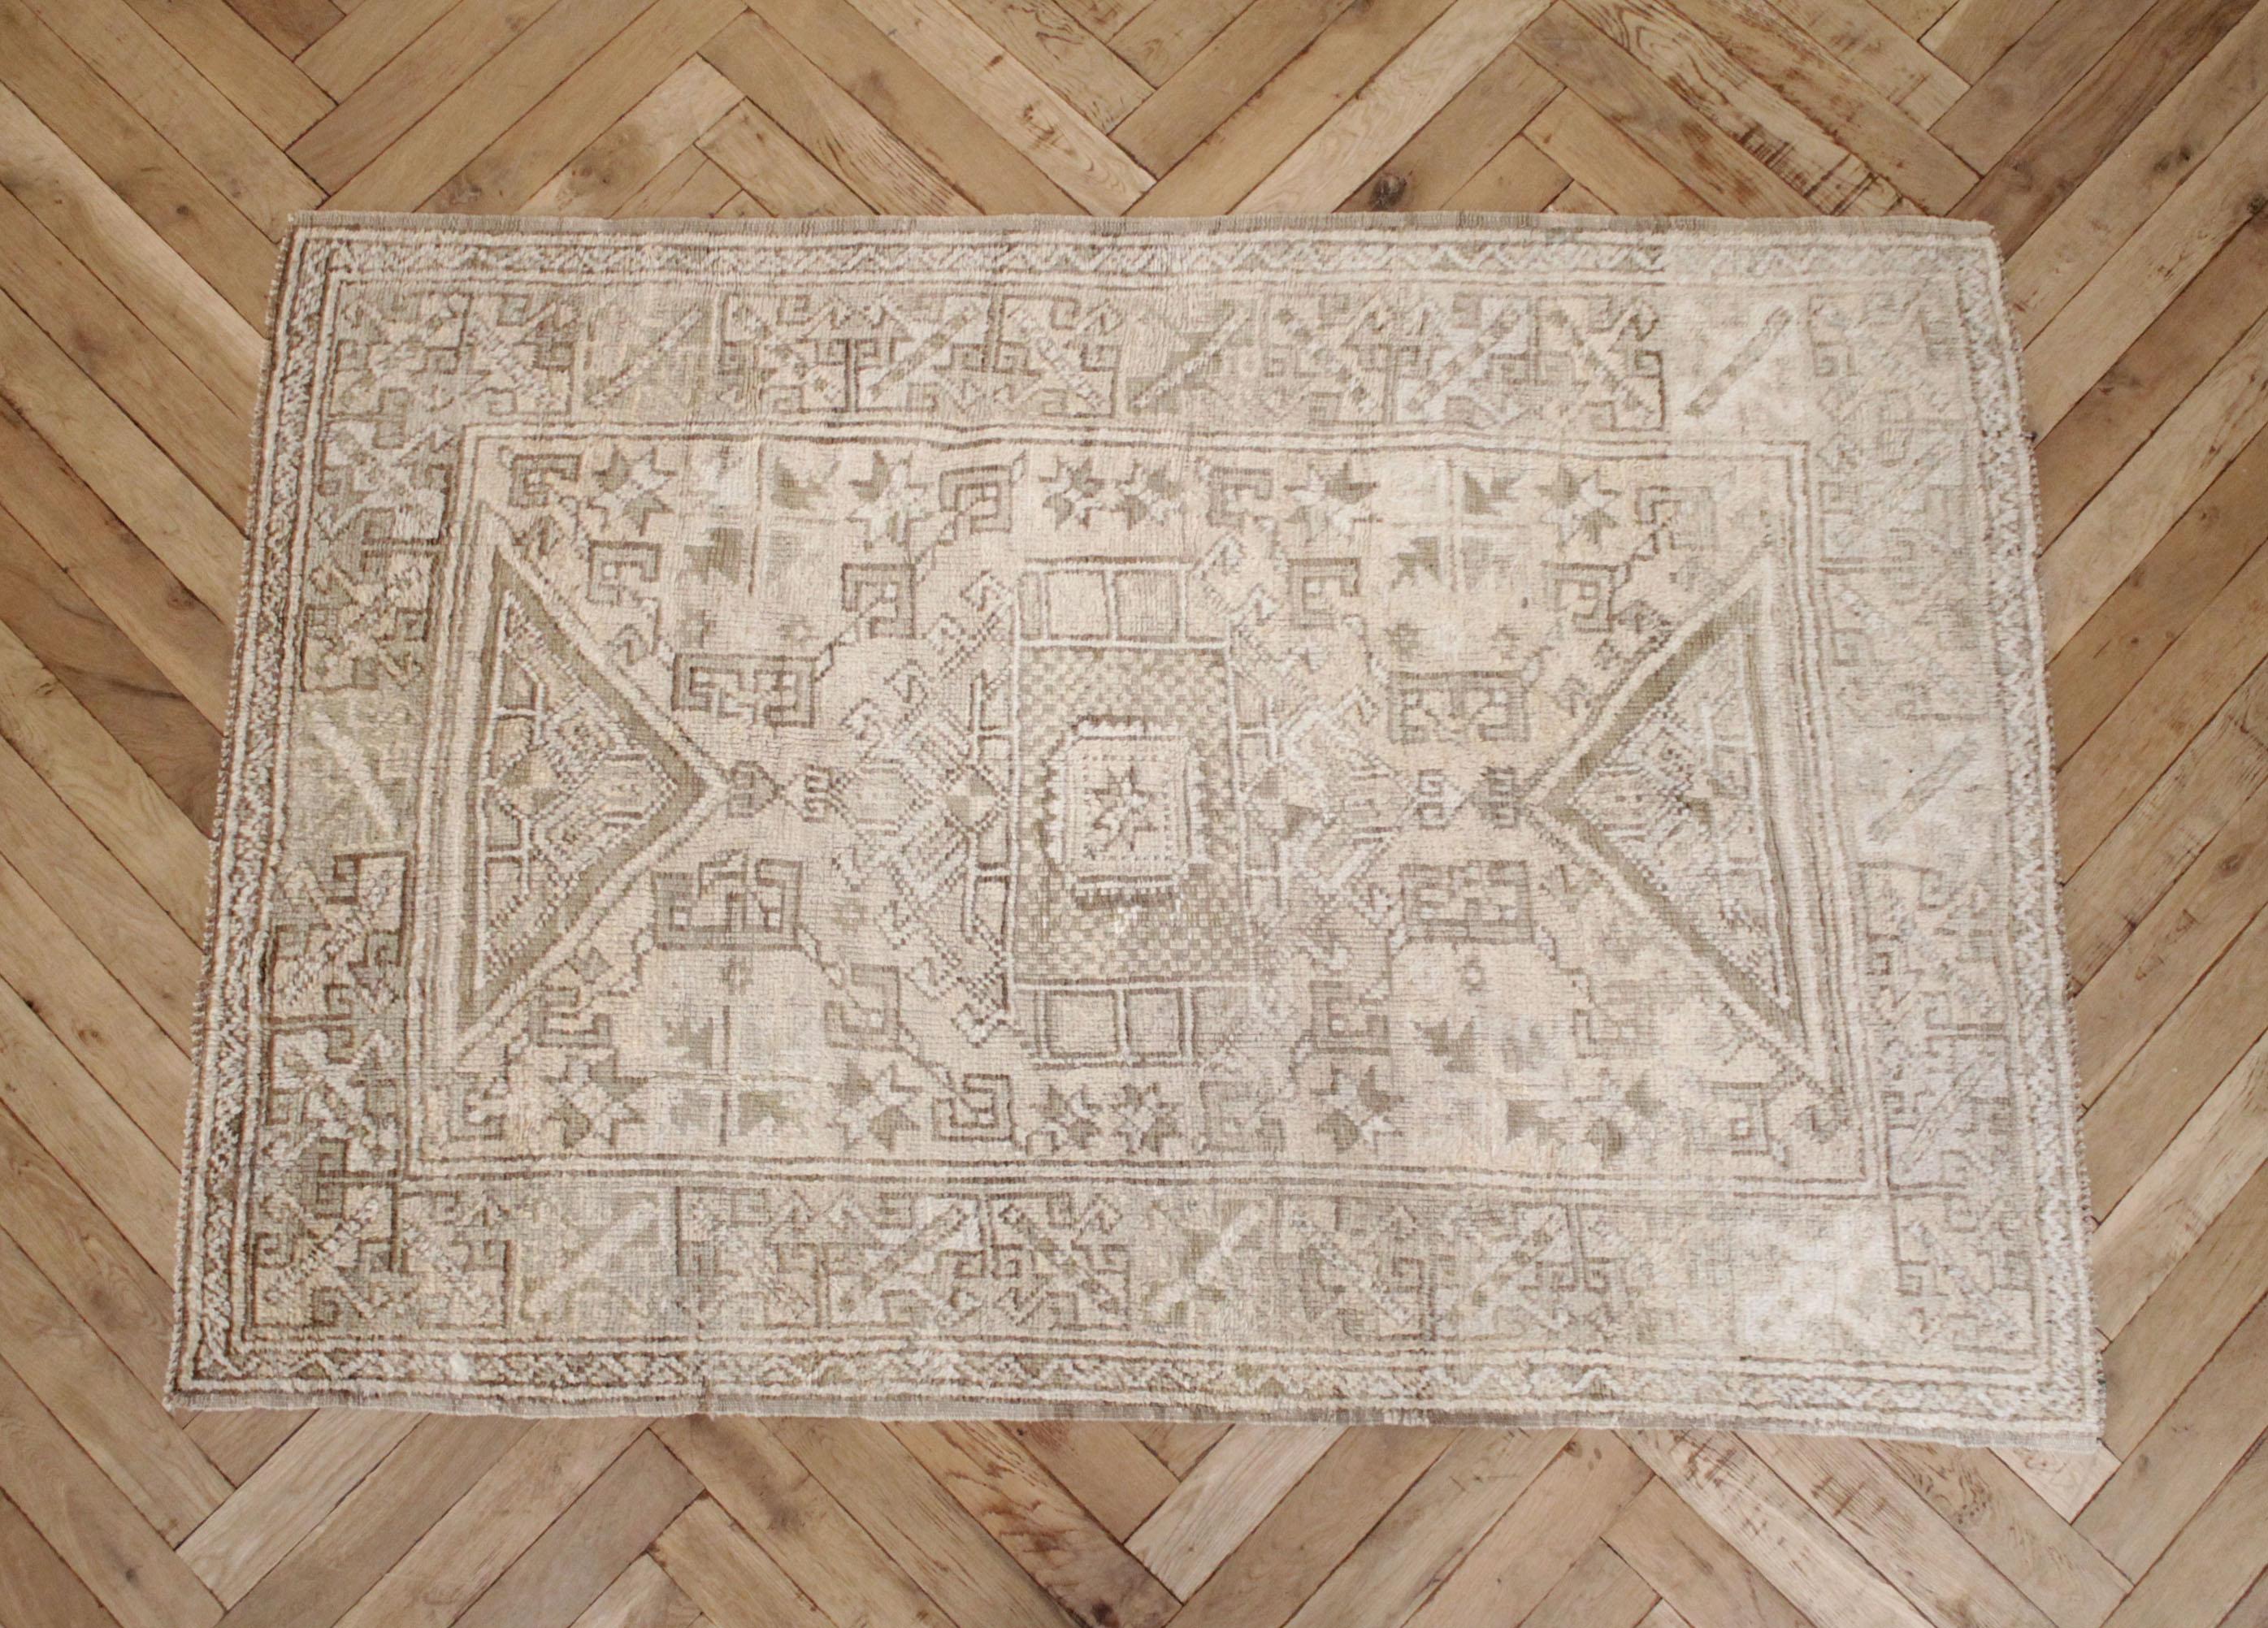 100% wool
This vintage Turkish rug has a very soft feel with light pile. Perfectly faded taupes, creams and browns.
While most rugs are stiff this style of rug is not stiff, and has more of a soft foldable quality.
Size: 47